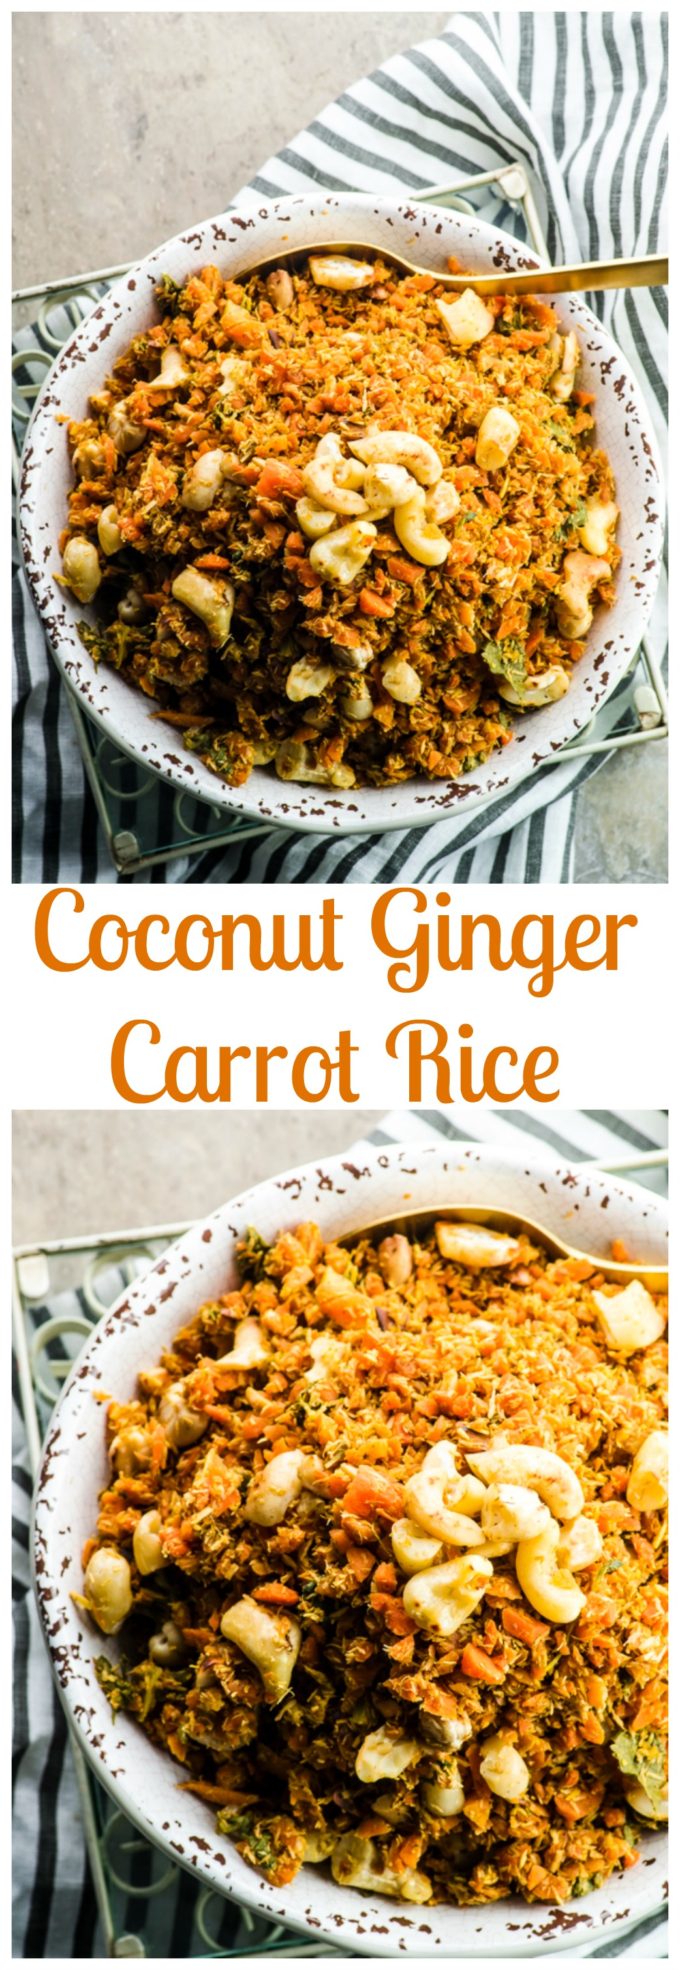 This flavorful , grain free Passover Coconut Ginger Carrot Rice is a great side dish to serve during the Holiday and all year long. Vegan and gluten free.